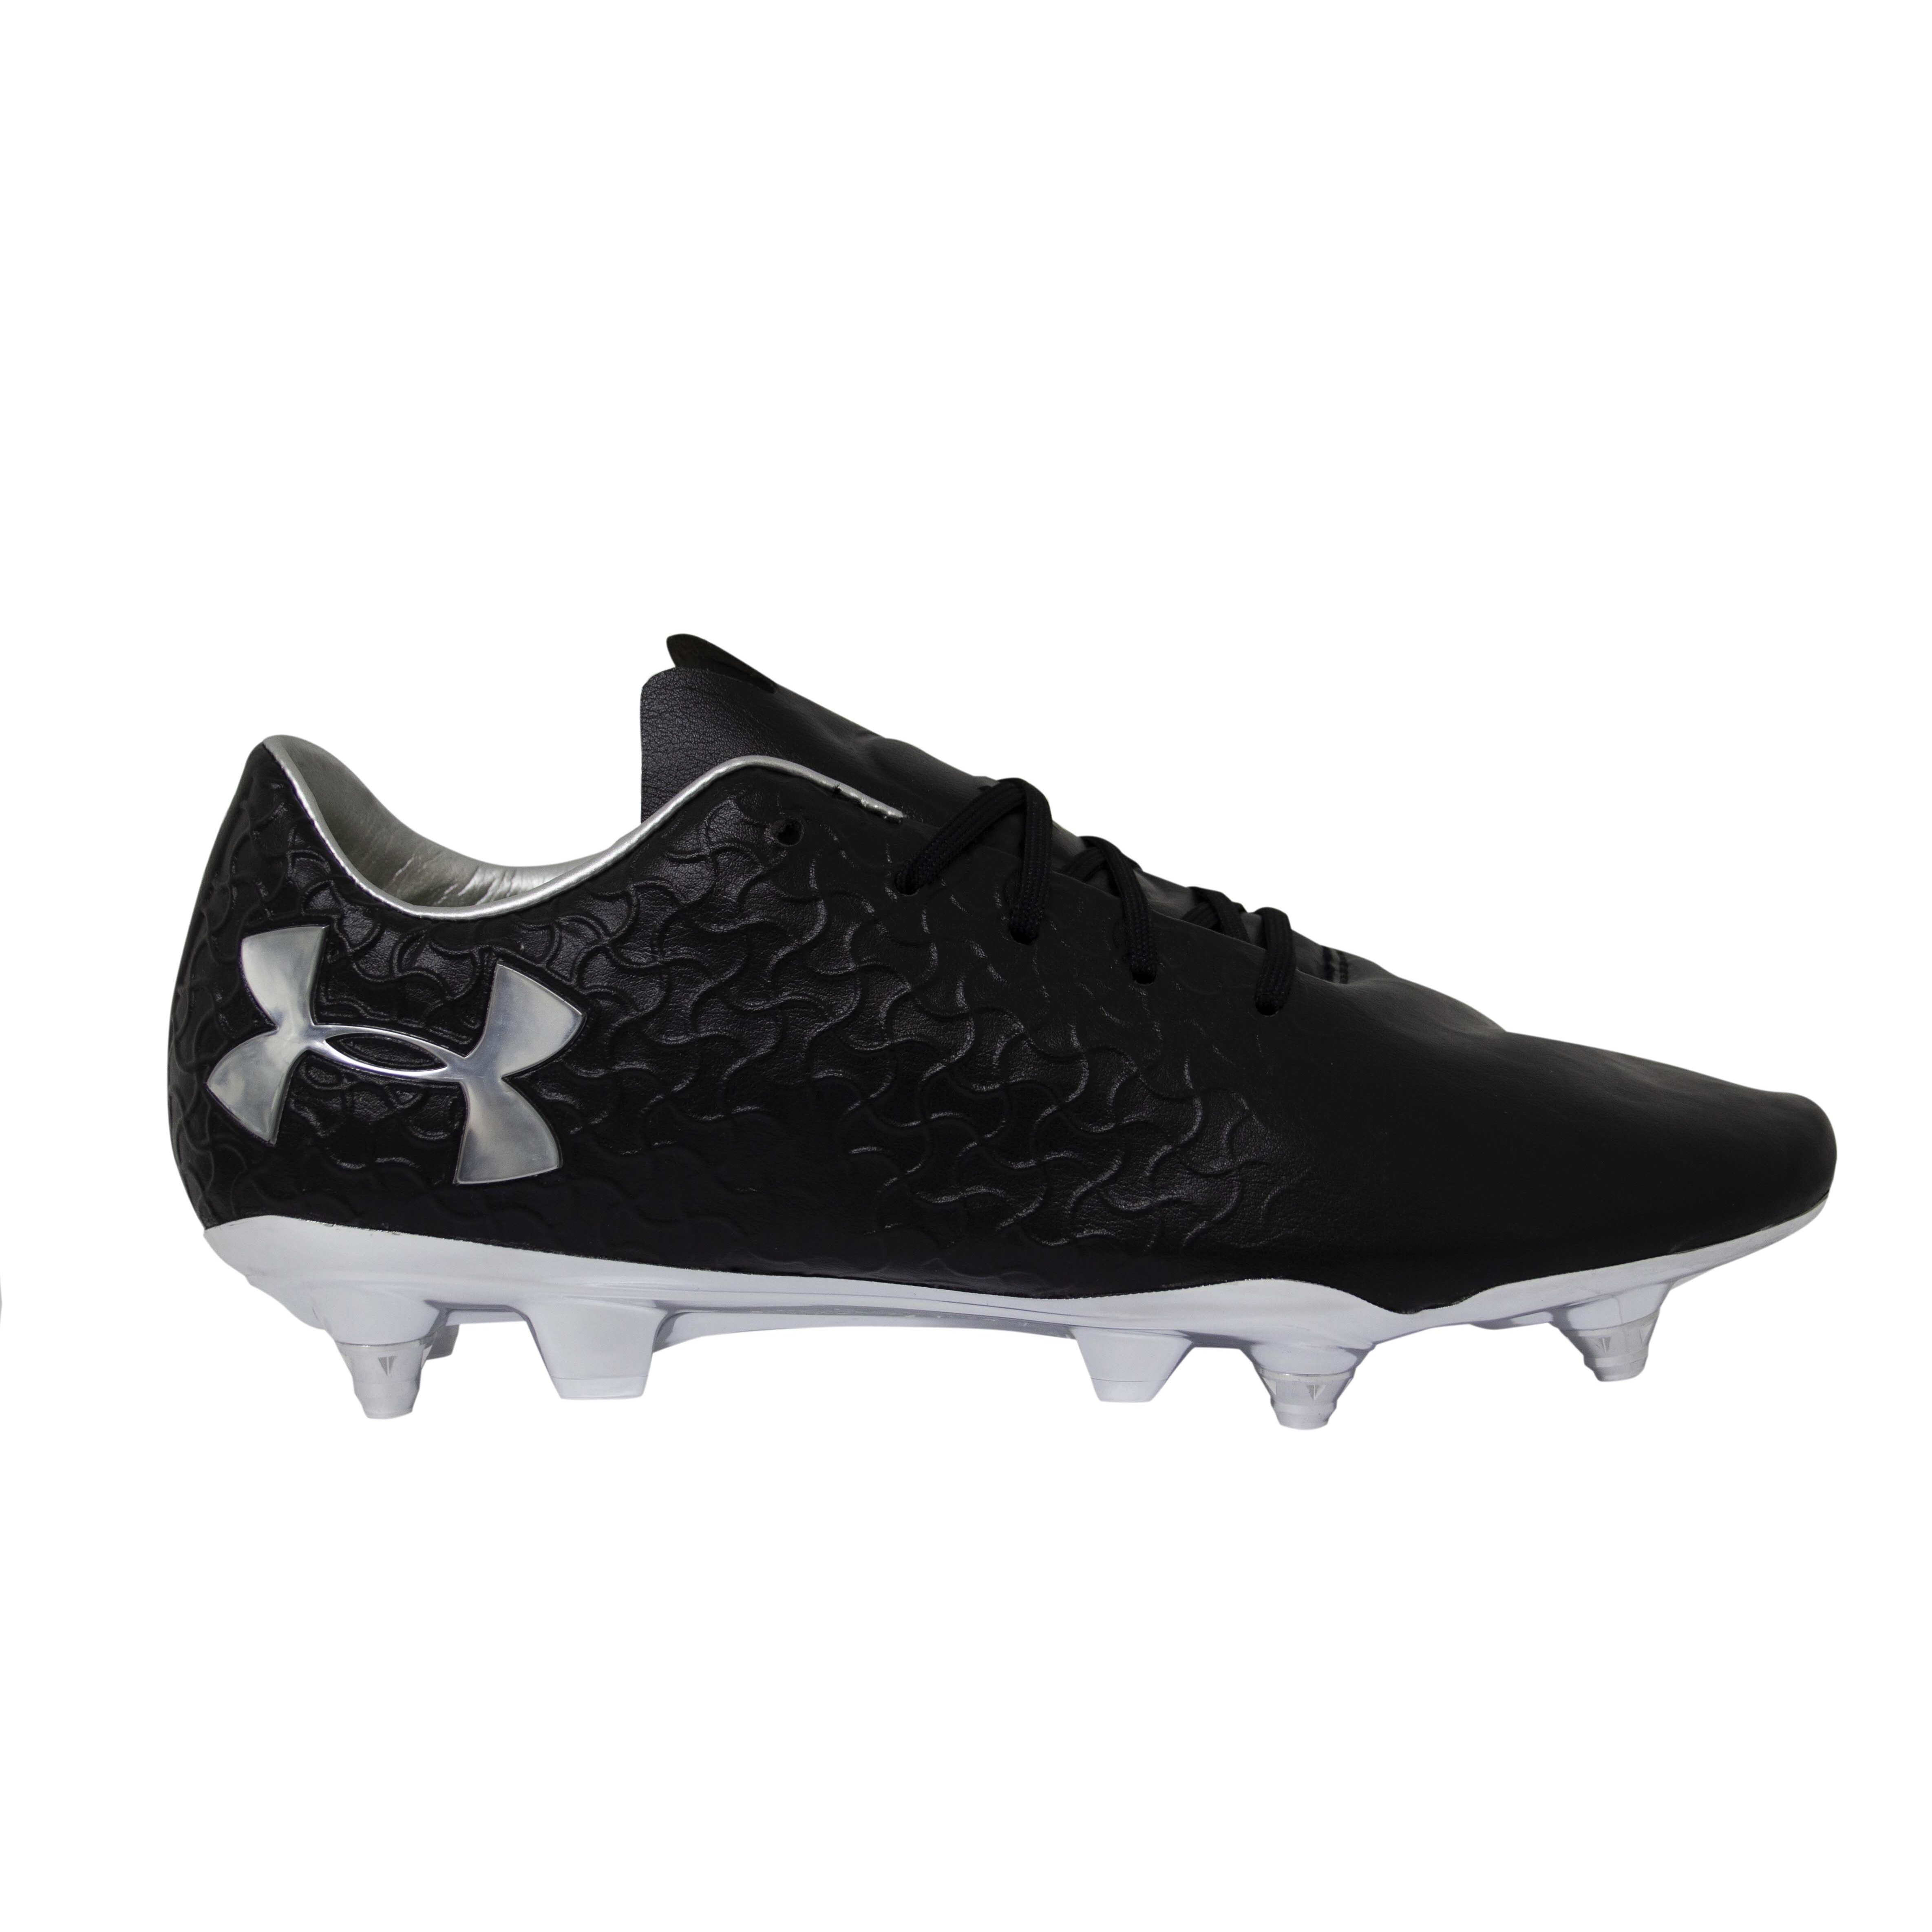 Under Armour UA Magnetico Pro Hybrid Leather SG Mens Football Boots 3000110 001